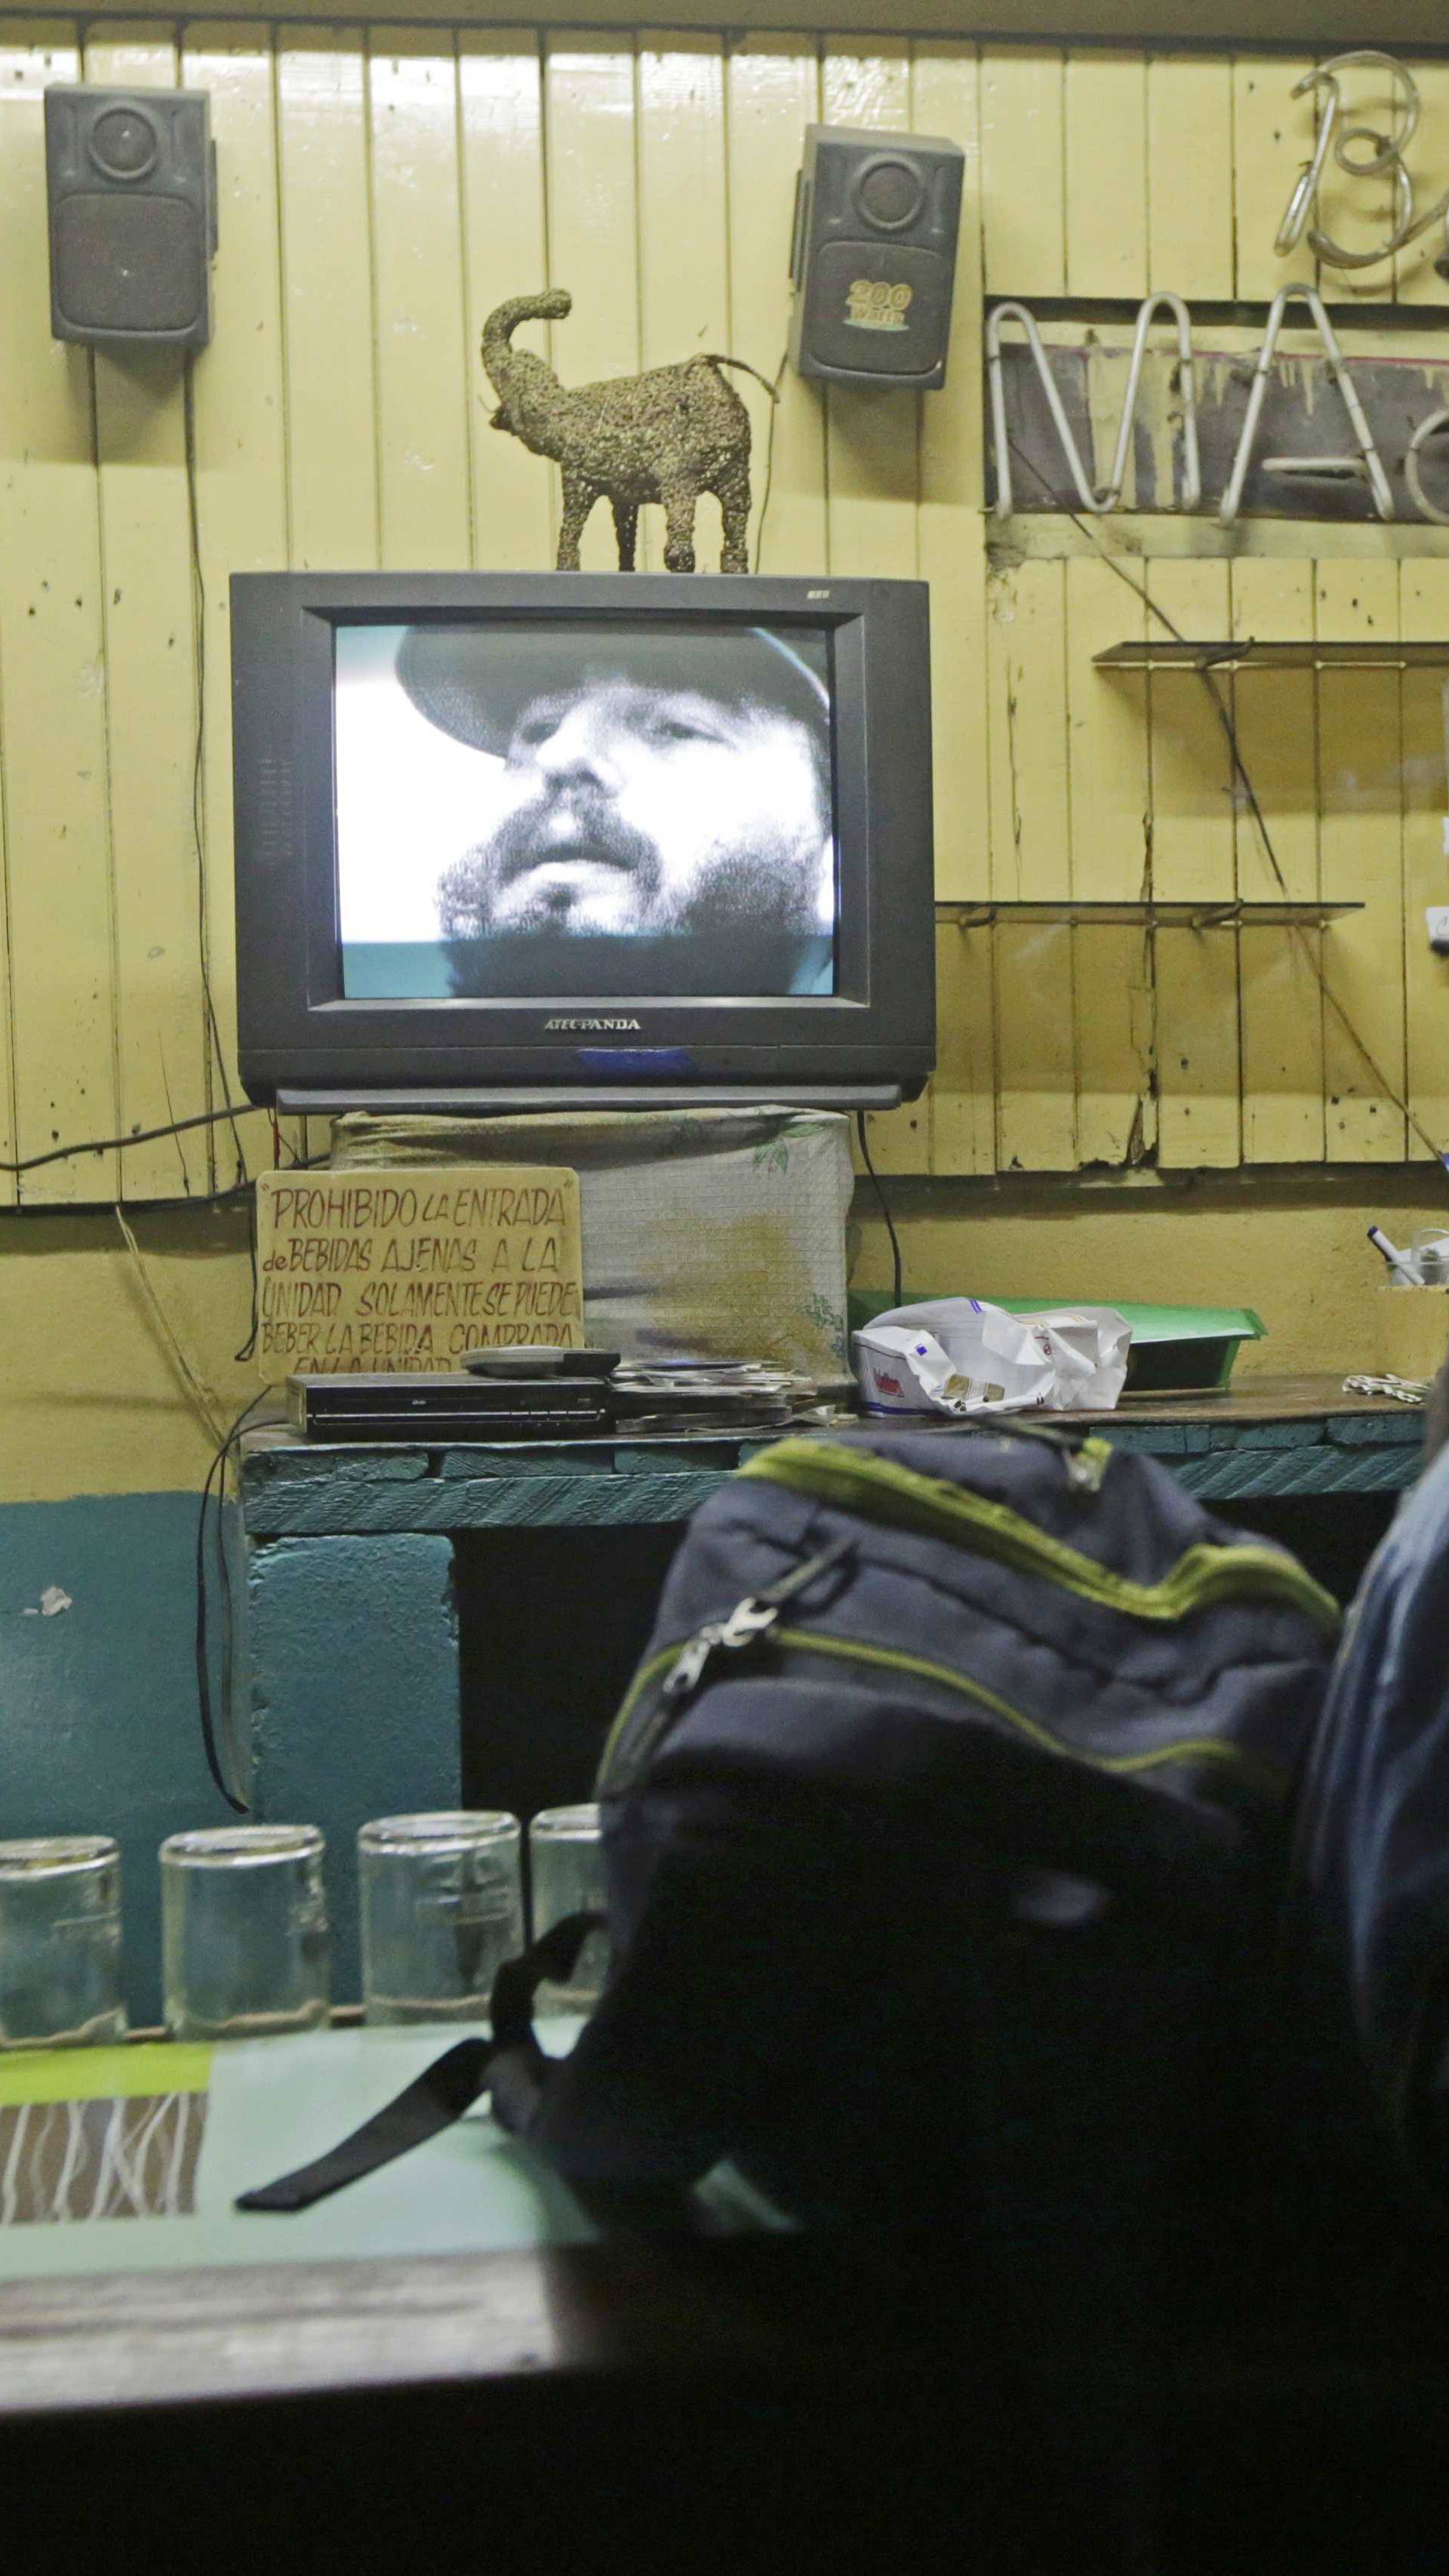 A man watches a television broadcast with the image of Cuba's former President Fidel Castro in Havana